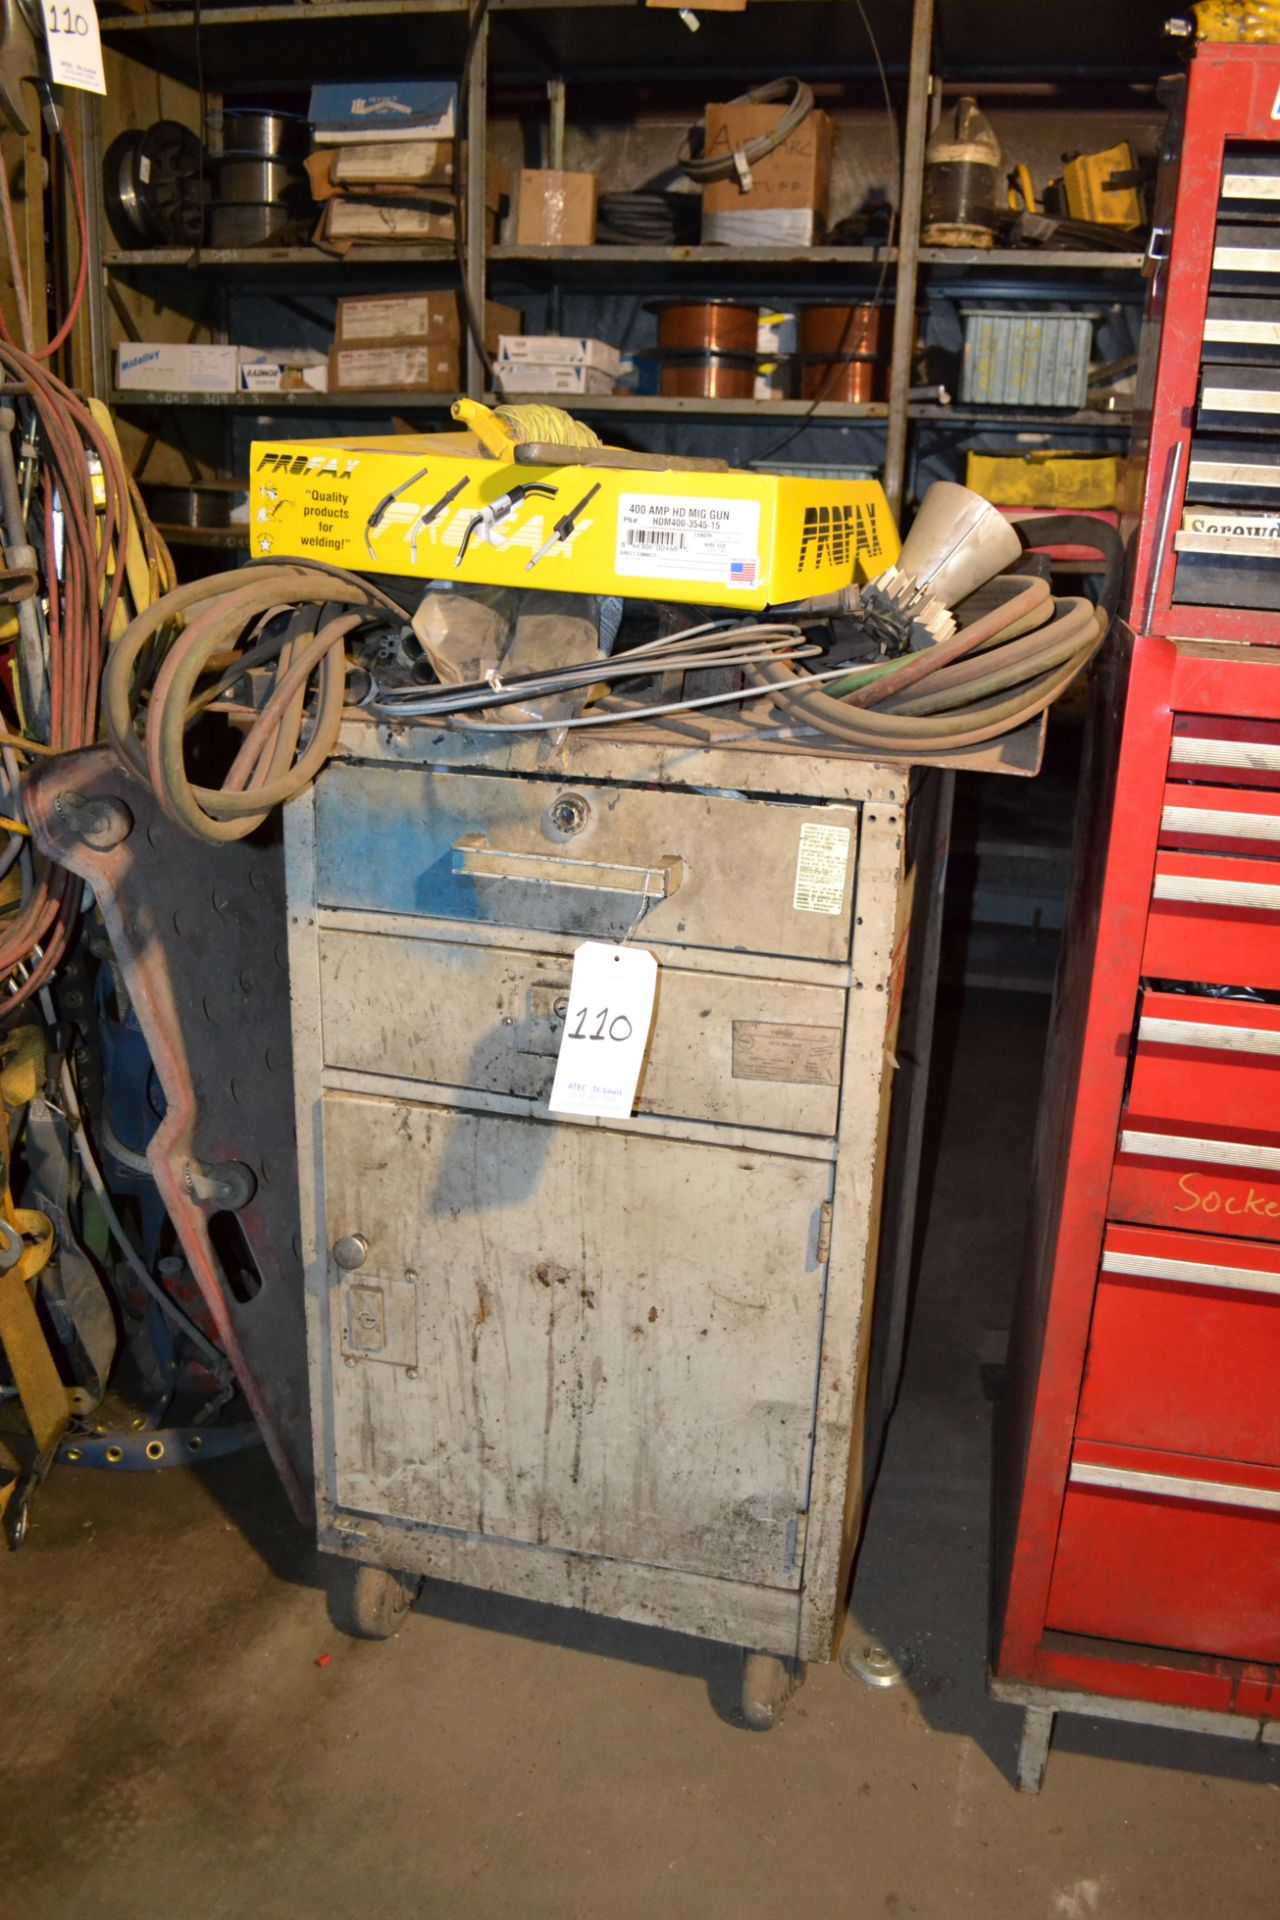 Lot Consisting of: Proto Tool Check, Metal Cabinet, Steel Table, (2) Sections Metal Shelving, - Image 46 of 76